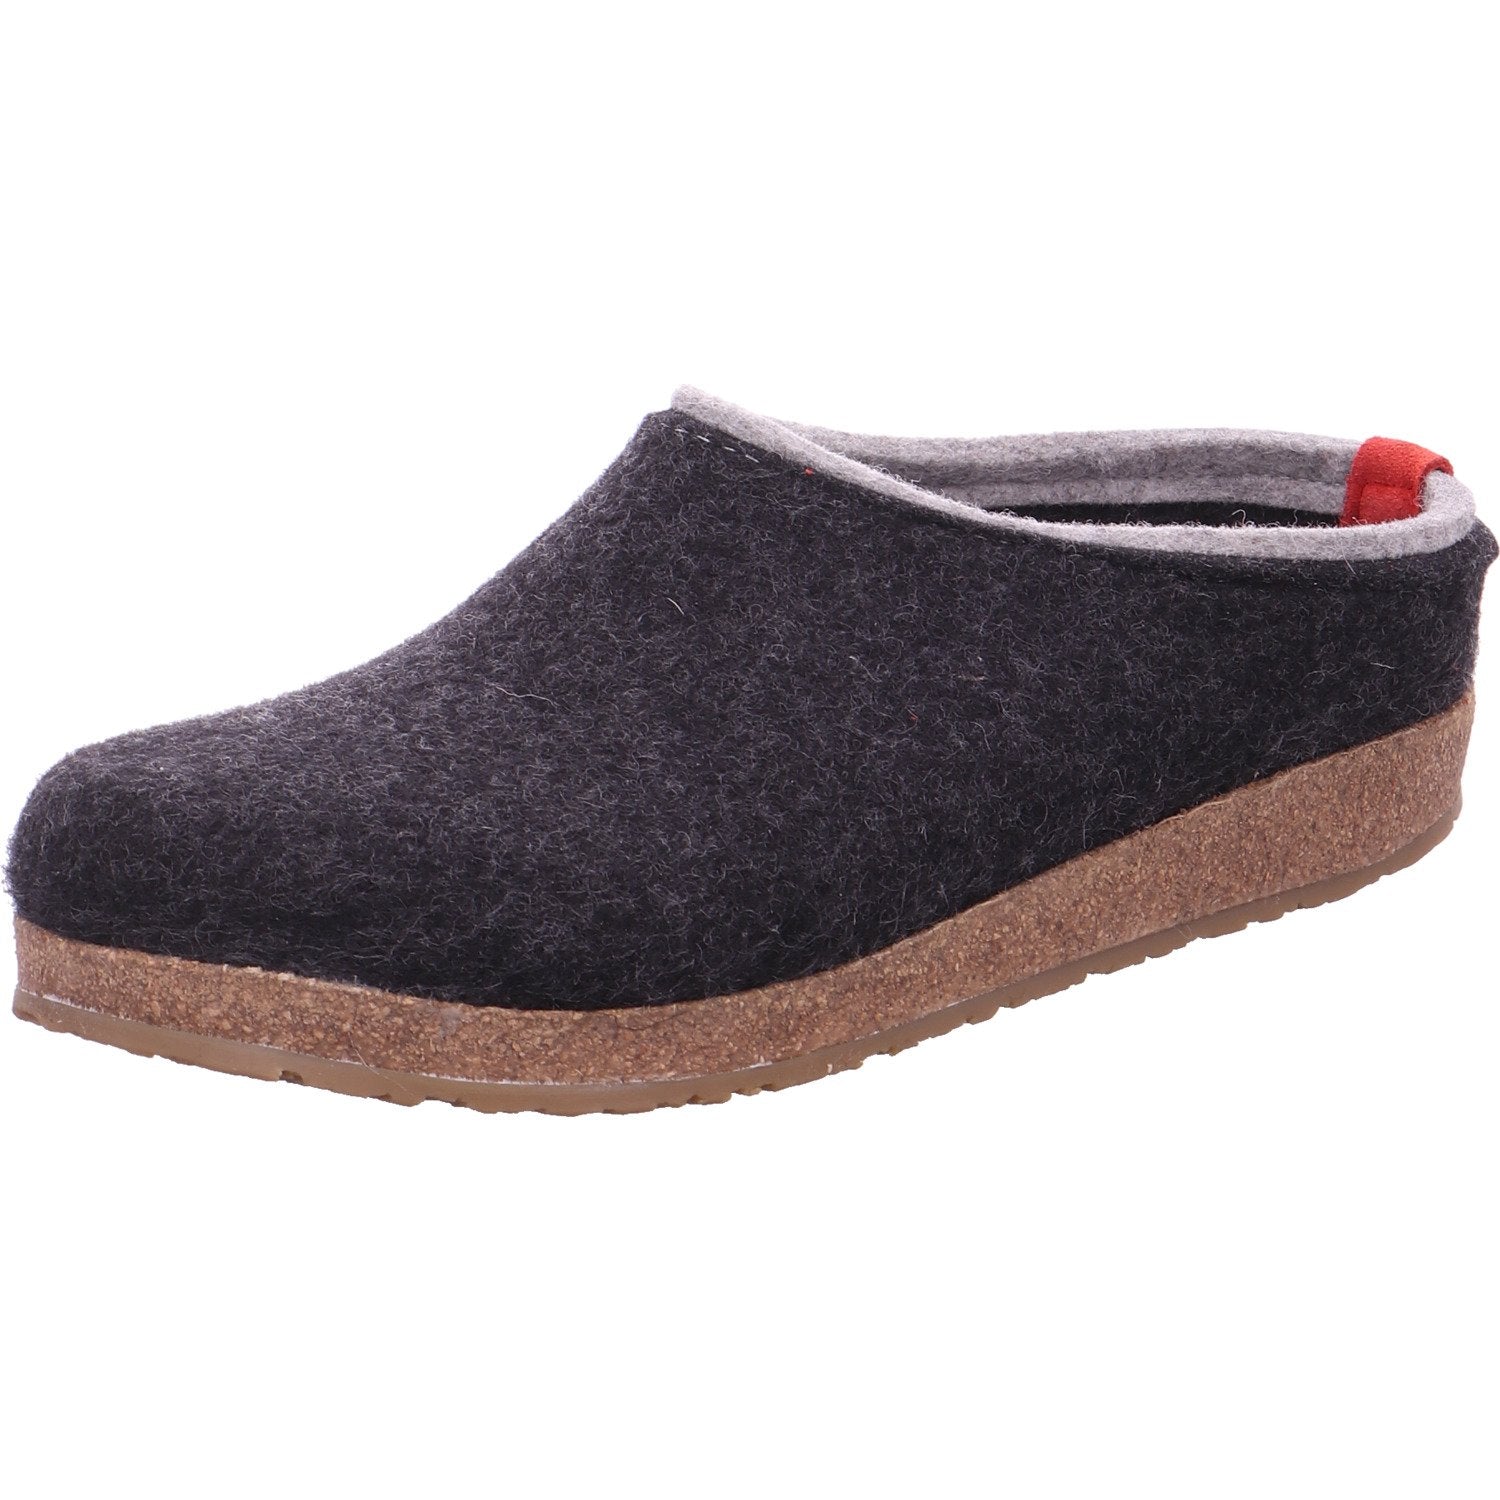 Haflinger Grizzly Slippers Clogs Mules Wool Felt Scuffs Slip On House Shoes Grey - Bartel-Shop